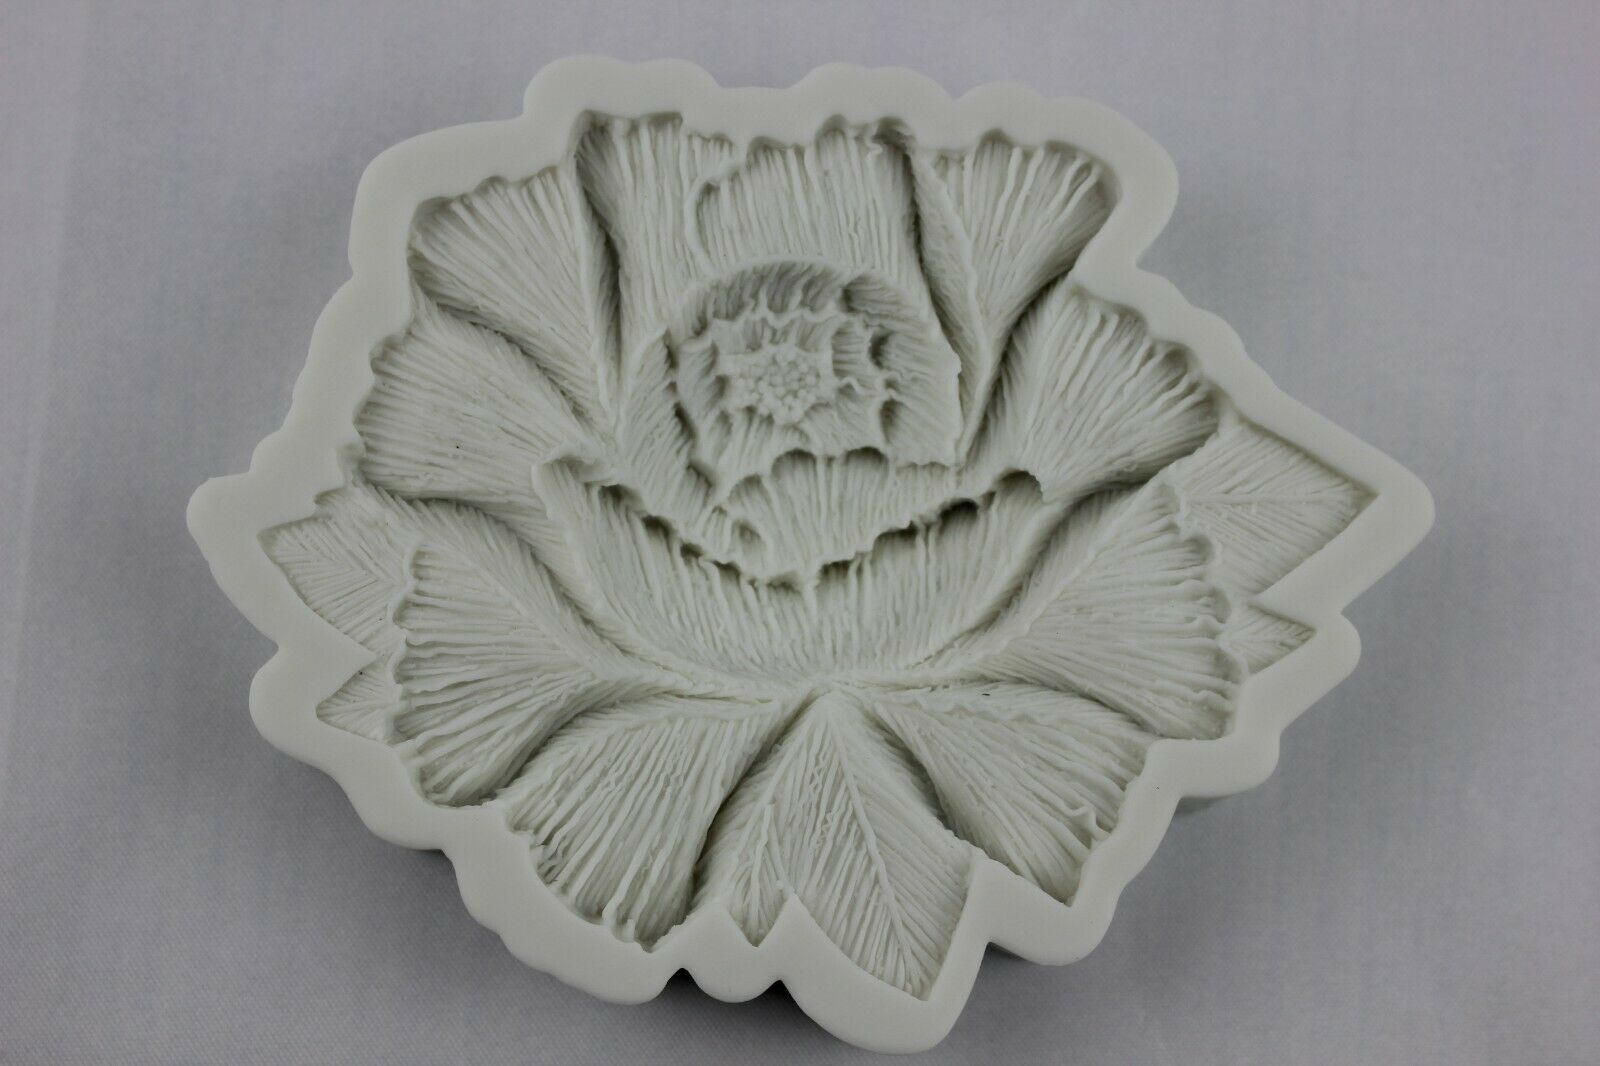 attachment-https://www.cupcakeaddicts.co.uk/wp-content/uploads/imported/2/Large-Flower-silicone-mould-Resin-Icing-Fondant-Ice-Soap-Sugar-Craft-Melt-3-324684382922-2.jpg